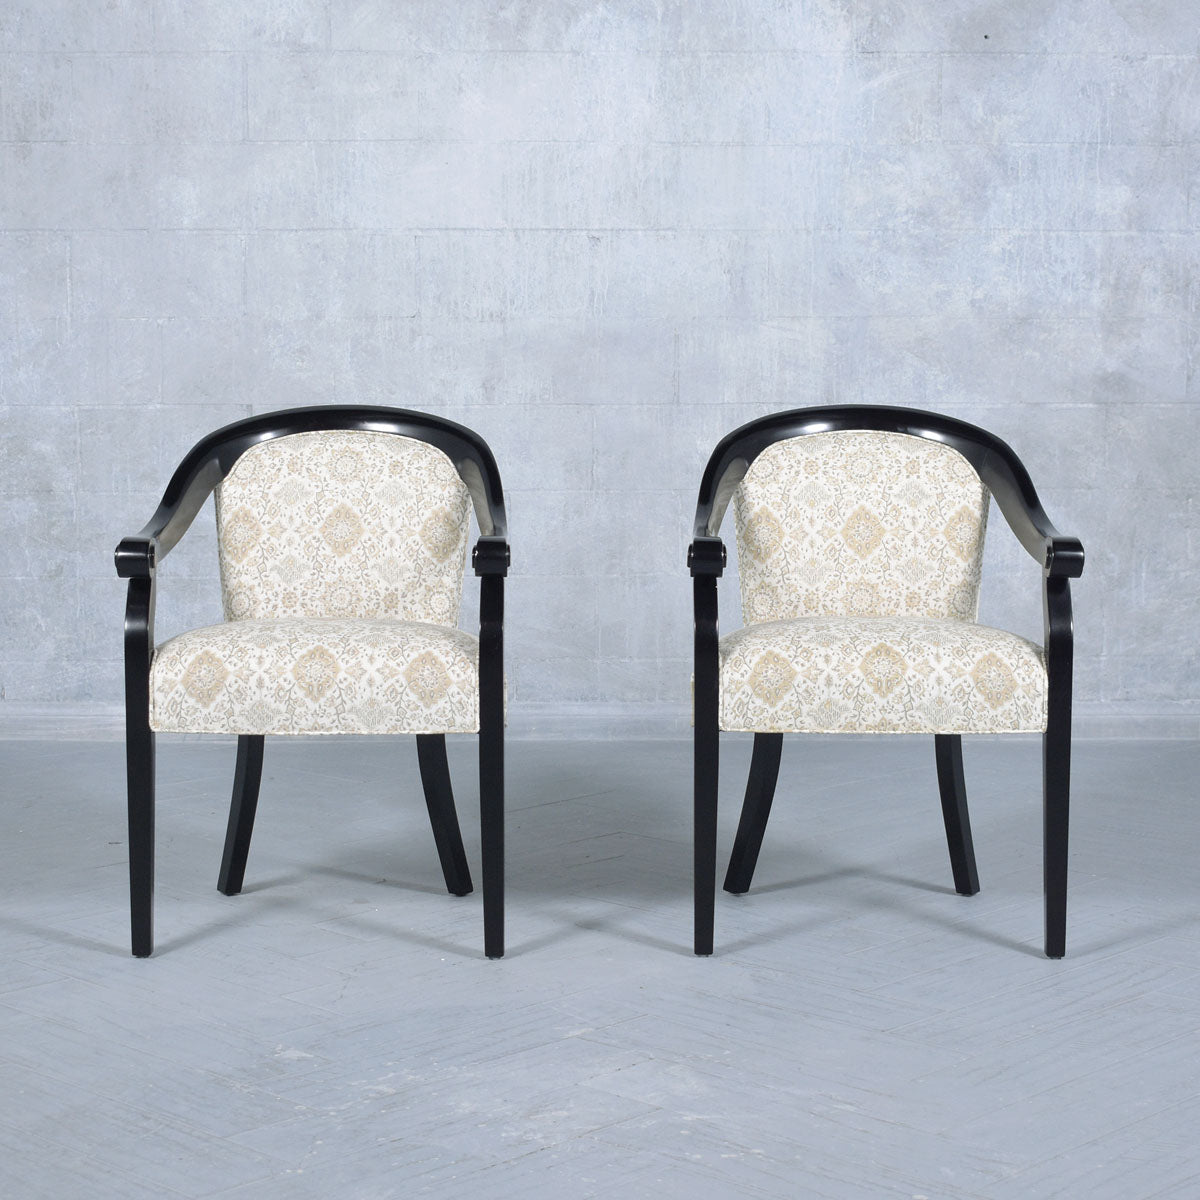 Pair of Modern Lacquered Arm Chairs by Hickory